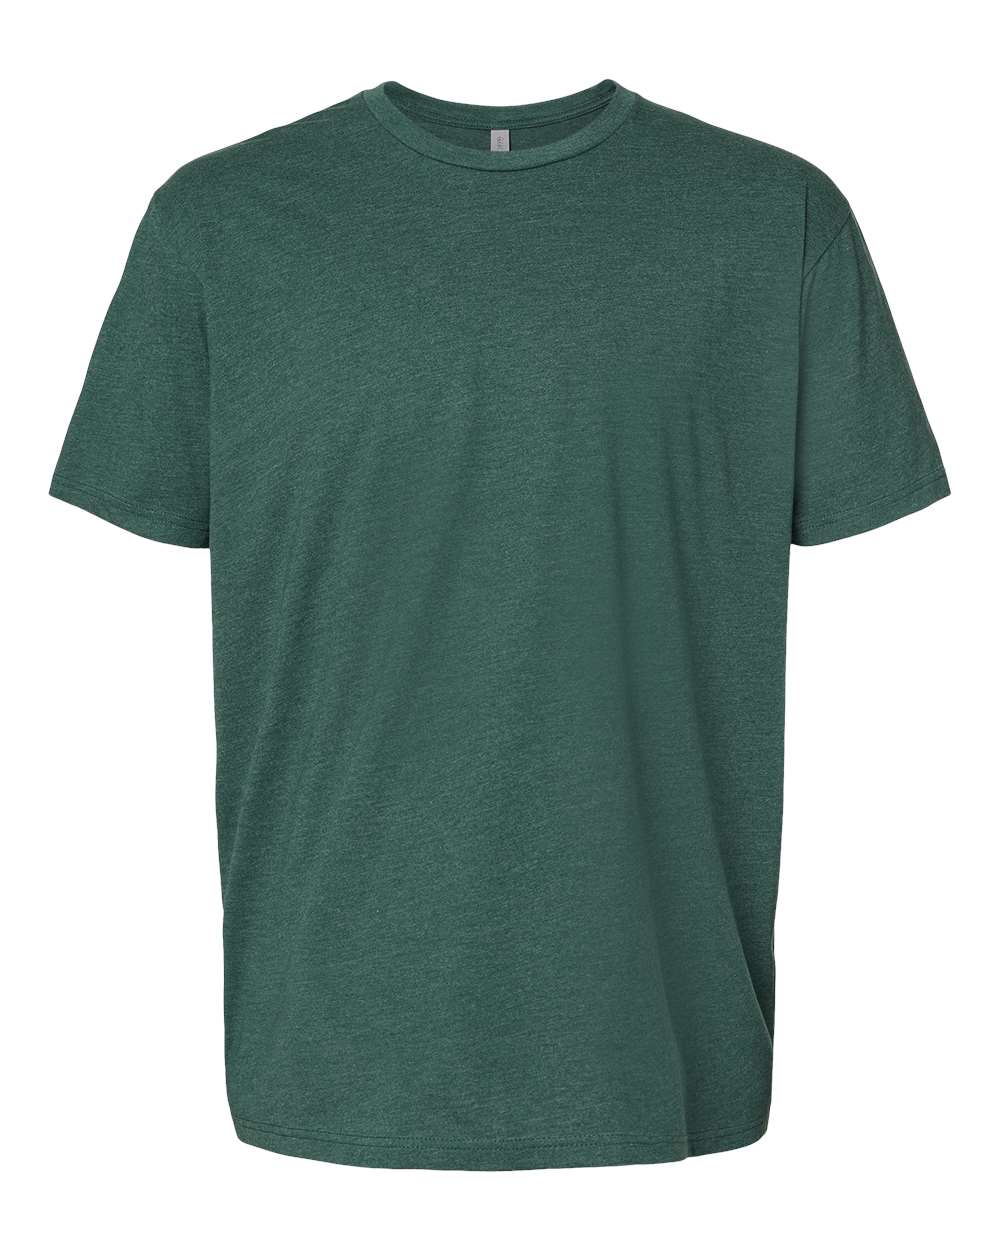 Next Level CVC Tee (6210) in Heather Forest Green